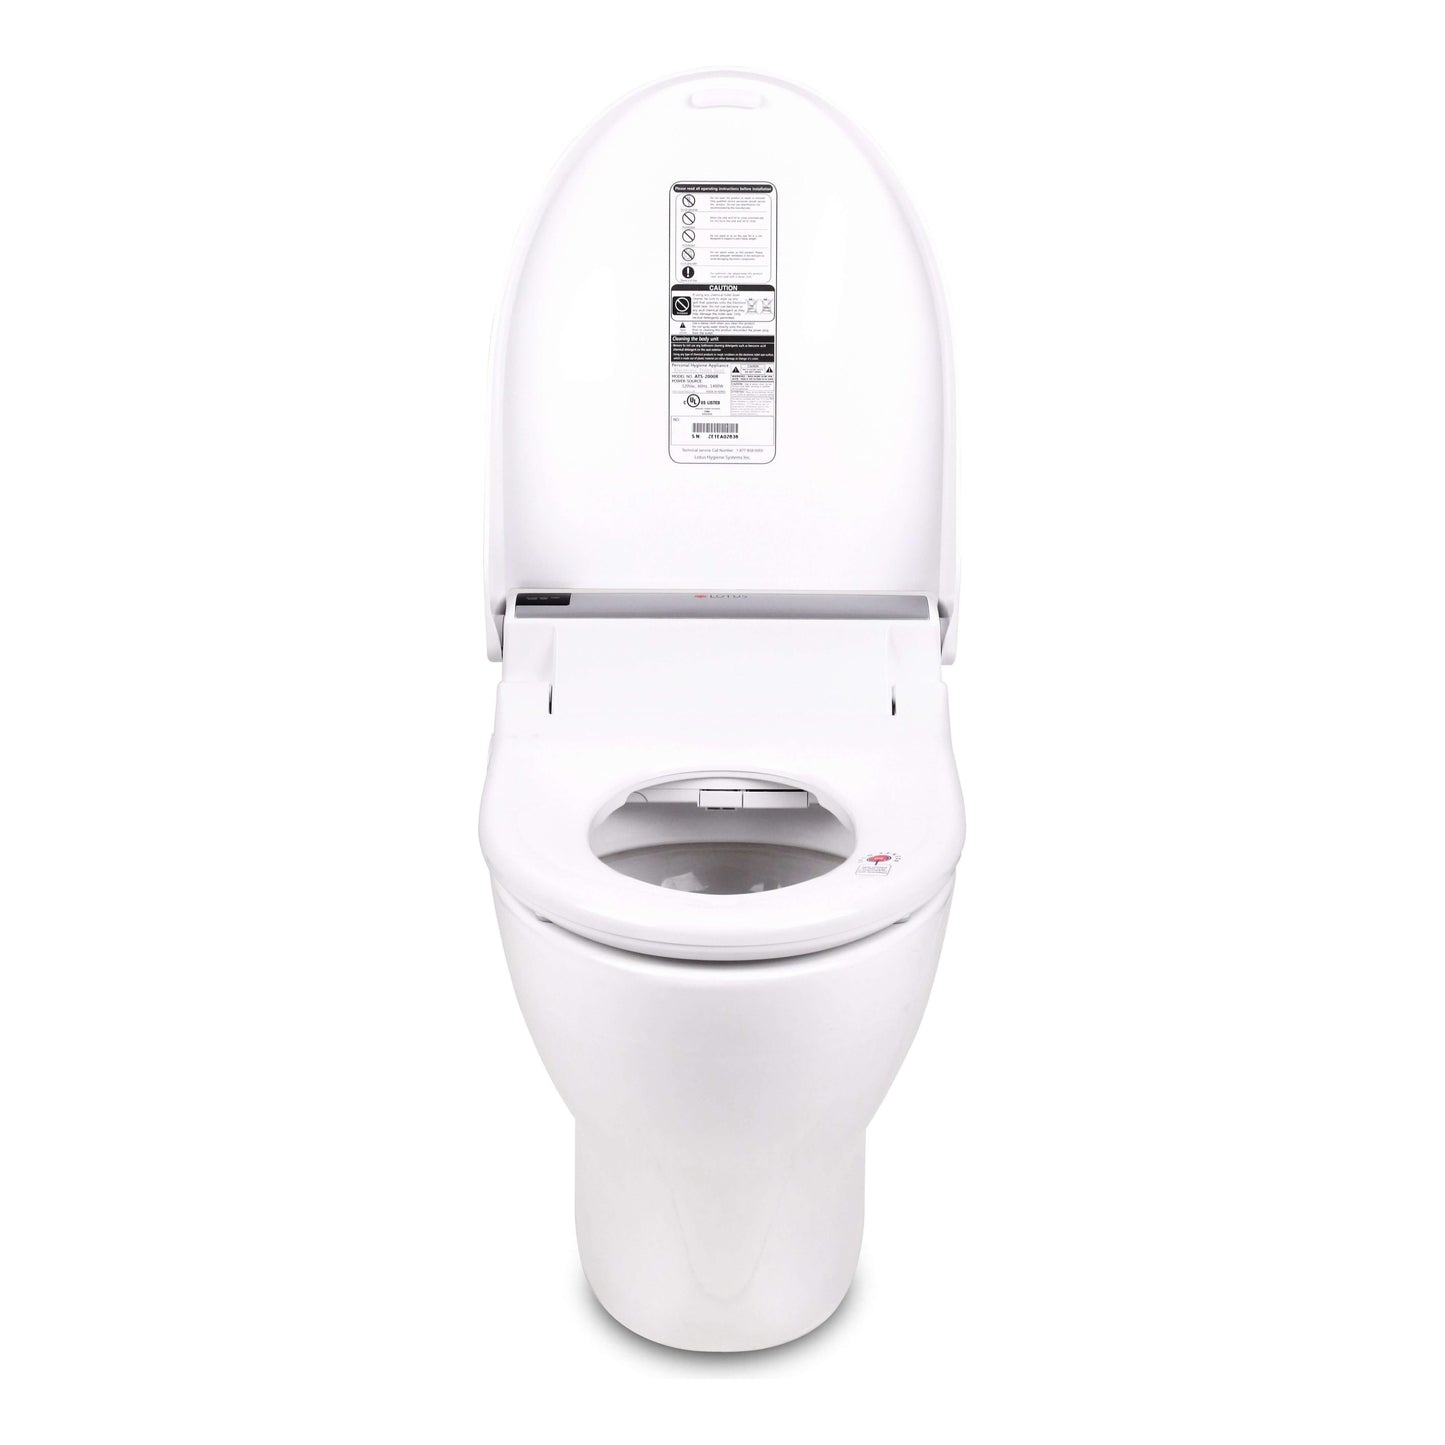 Lotus Bidet Seat ATS-2000 - front view with lid open attached to a toilet